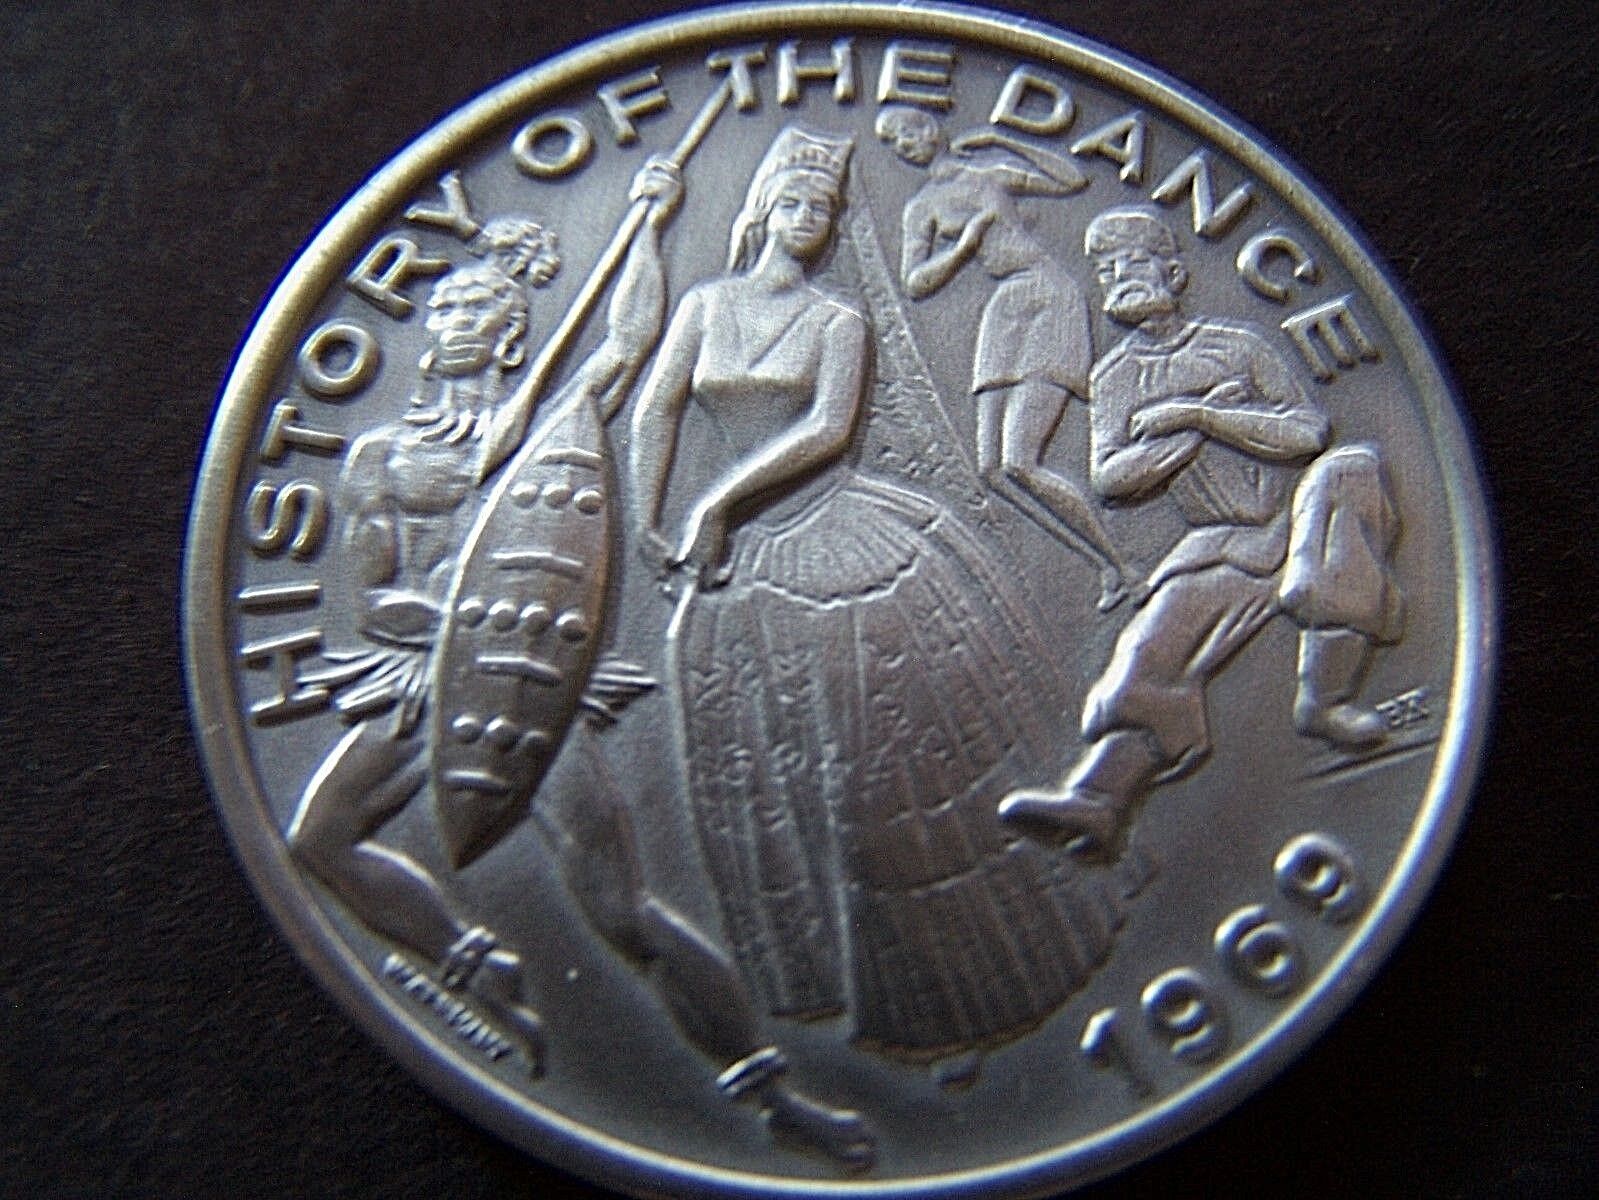 Rare 1969 Alla HISTORY OF THE DANCE  Brushed Aluminum 12g Mardi Gras Doubloon